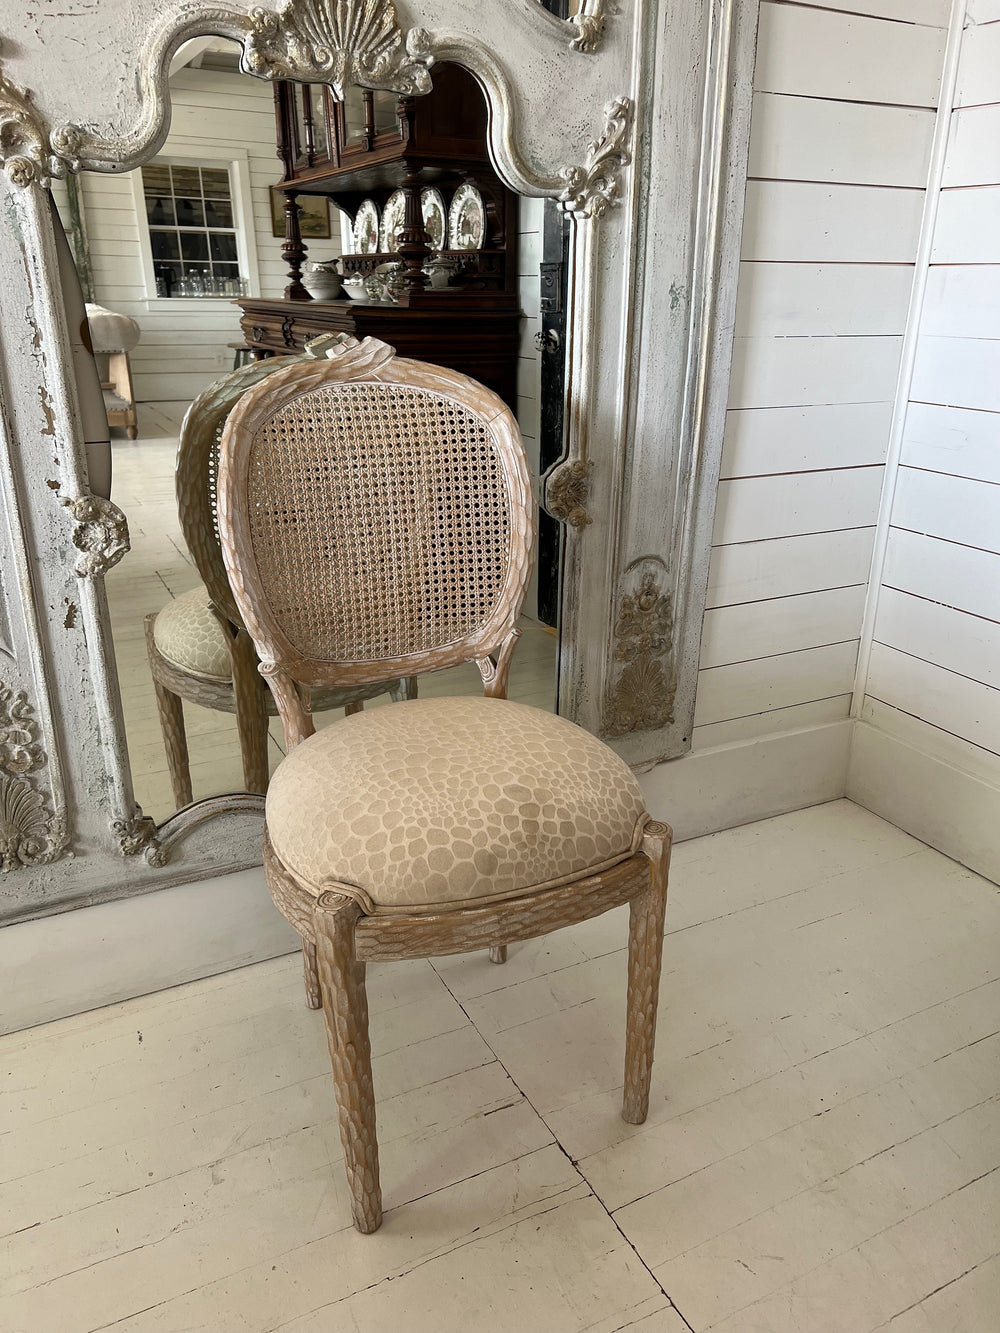 Thrifted Sewing Chair Make-Over – The Dimestore Gypsy